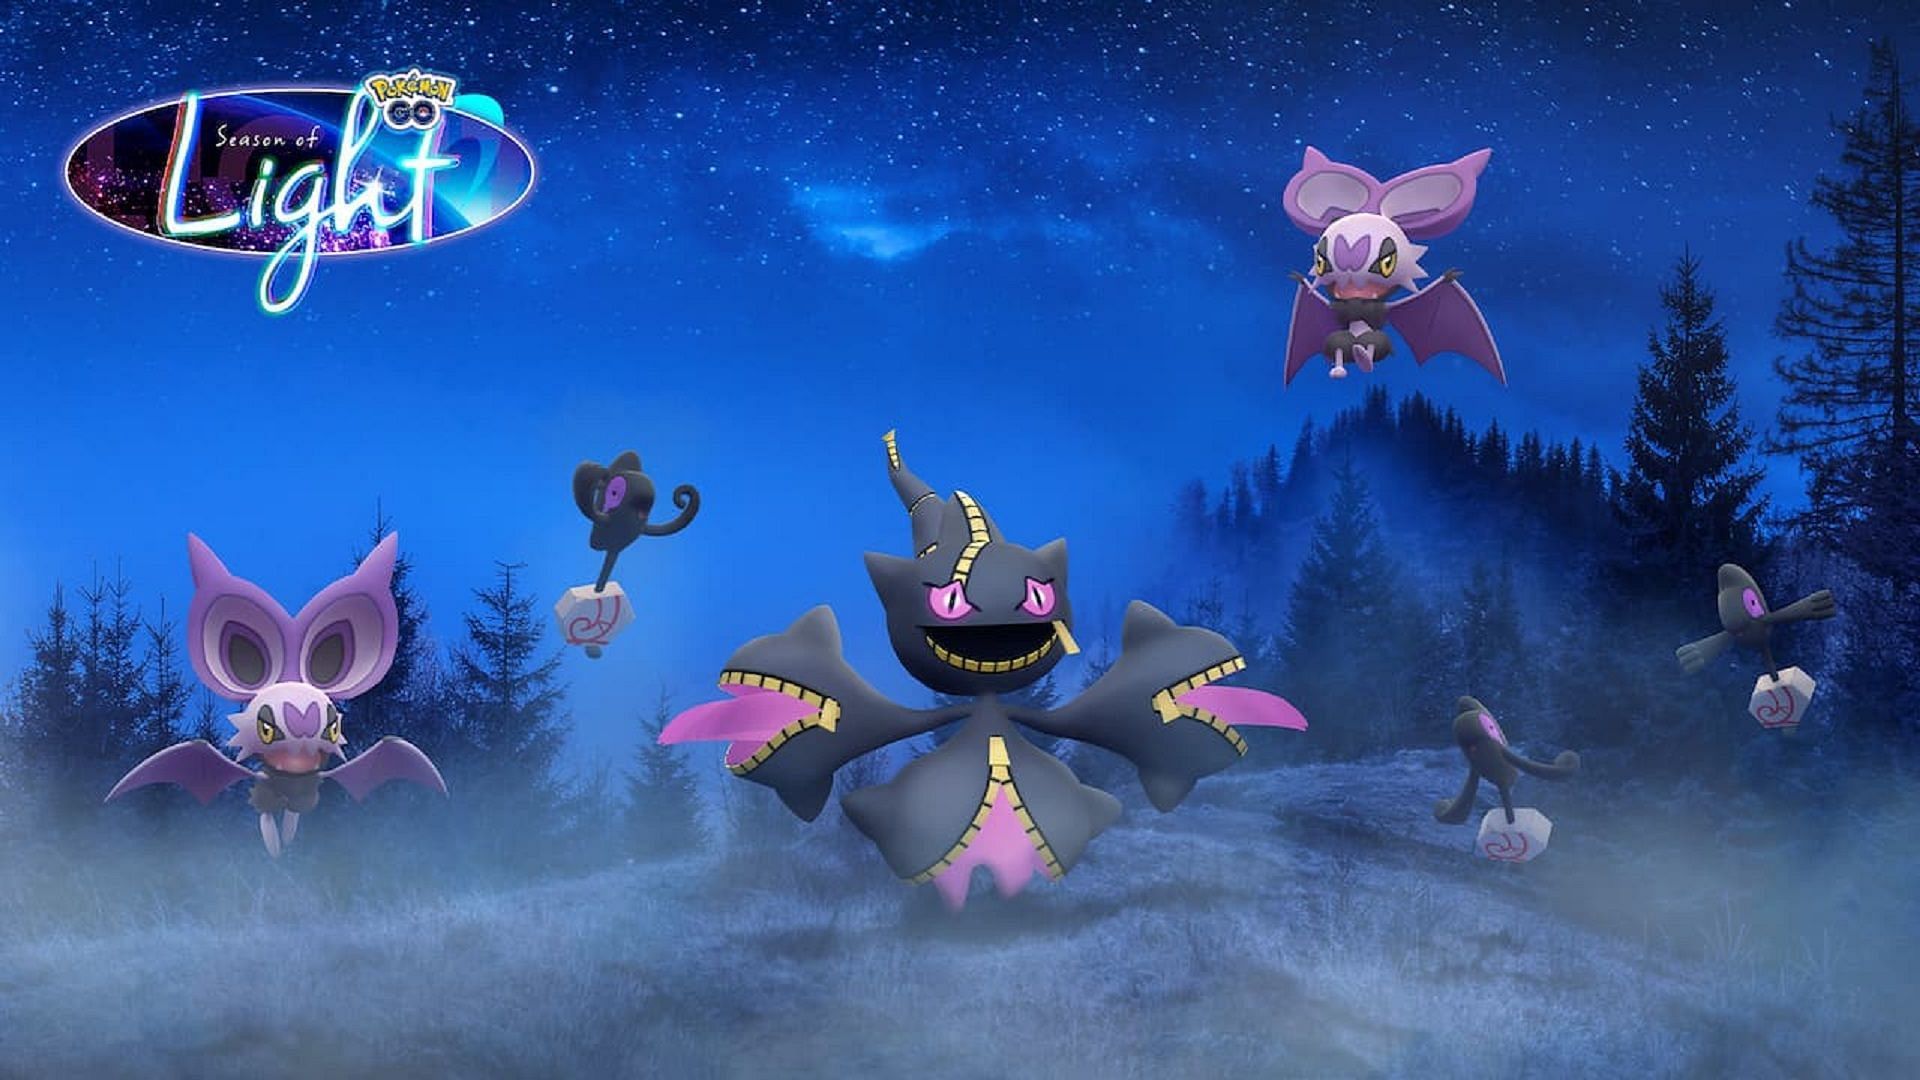 Mysterious Masks is a Special Research Story taking place in Pokemon GO